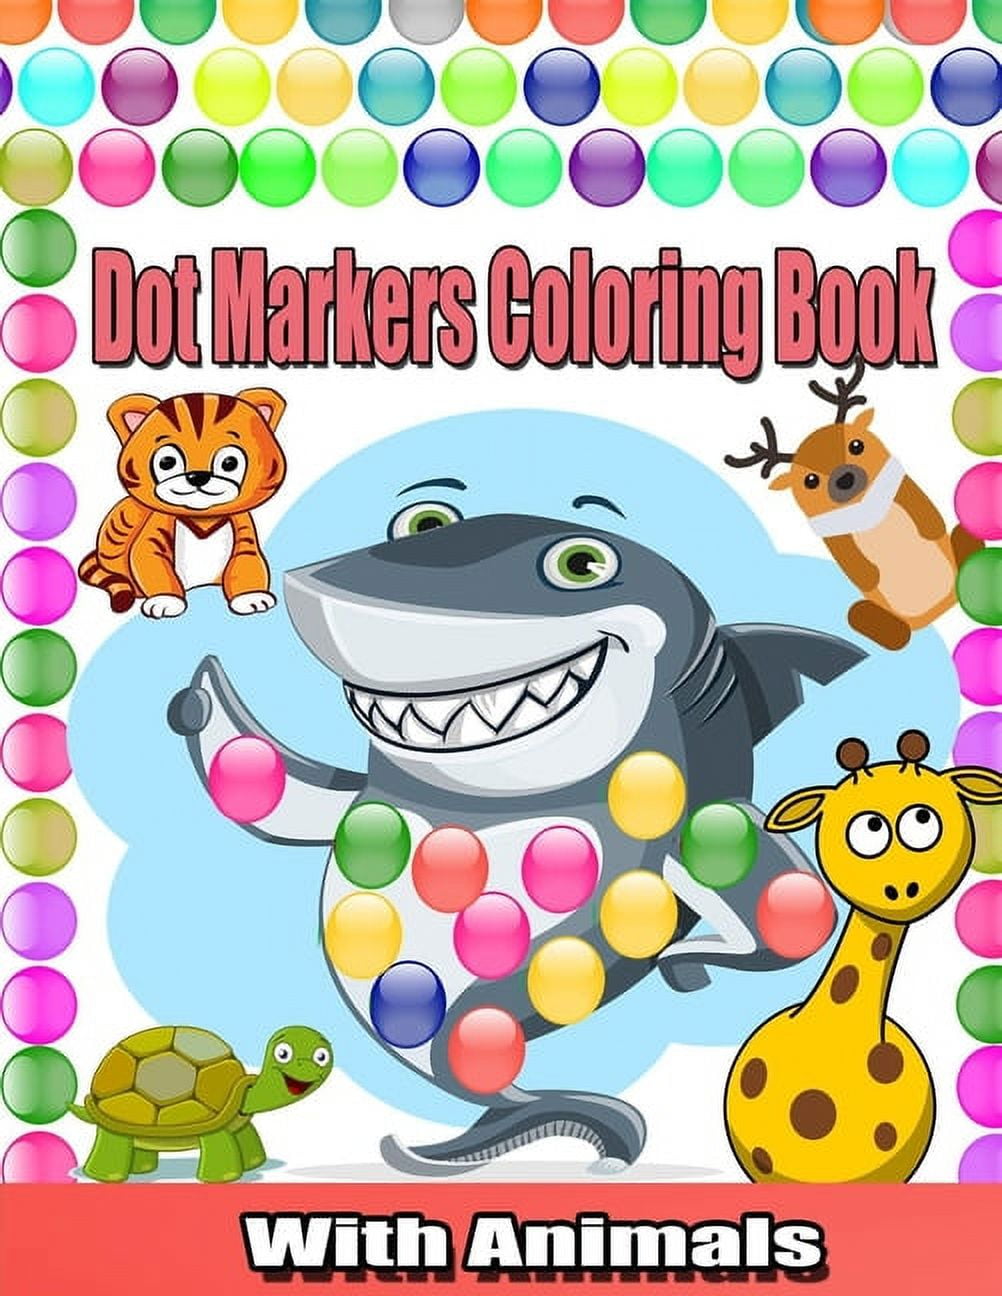 Sea Animals Dot Marker Coloring Book for Toddlers, Kids, Girls and Boys  Ages 2-5, Big guided dots, 40 Big, Simple, Fun Picture Animals For  Beginners